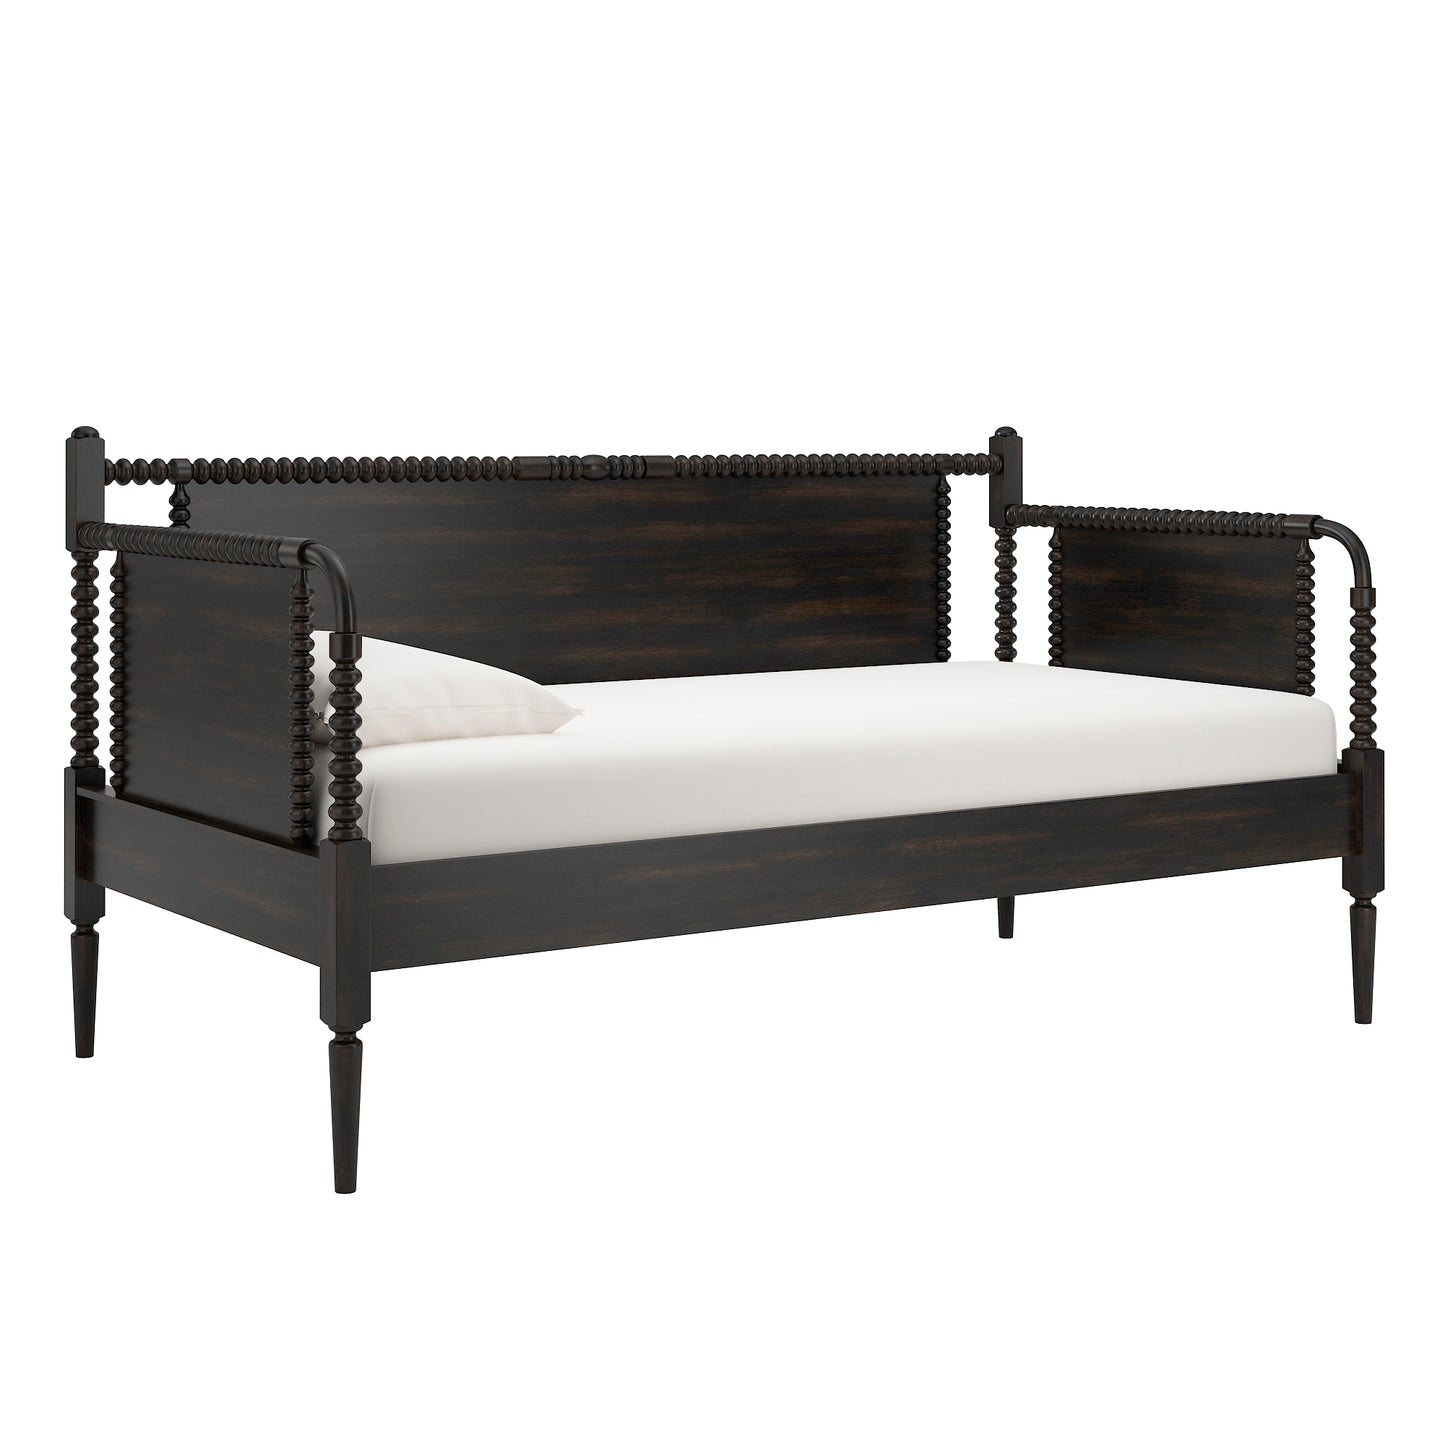 Traditional Beaded Wood Daybed - Antique Black, No Trundle